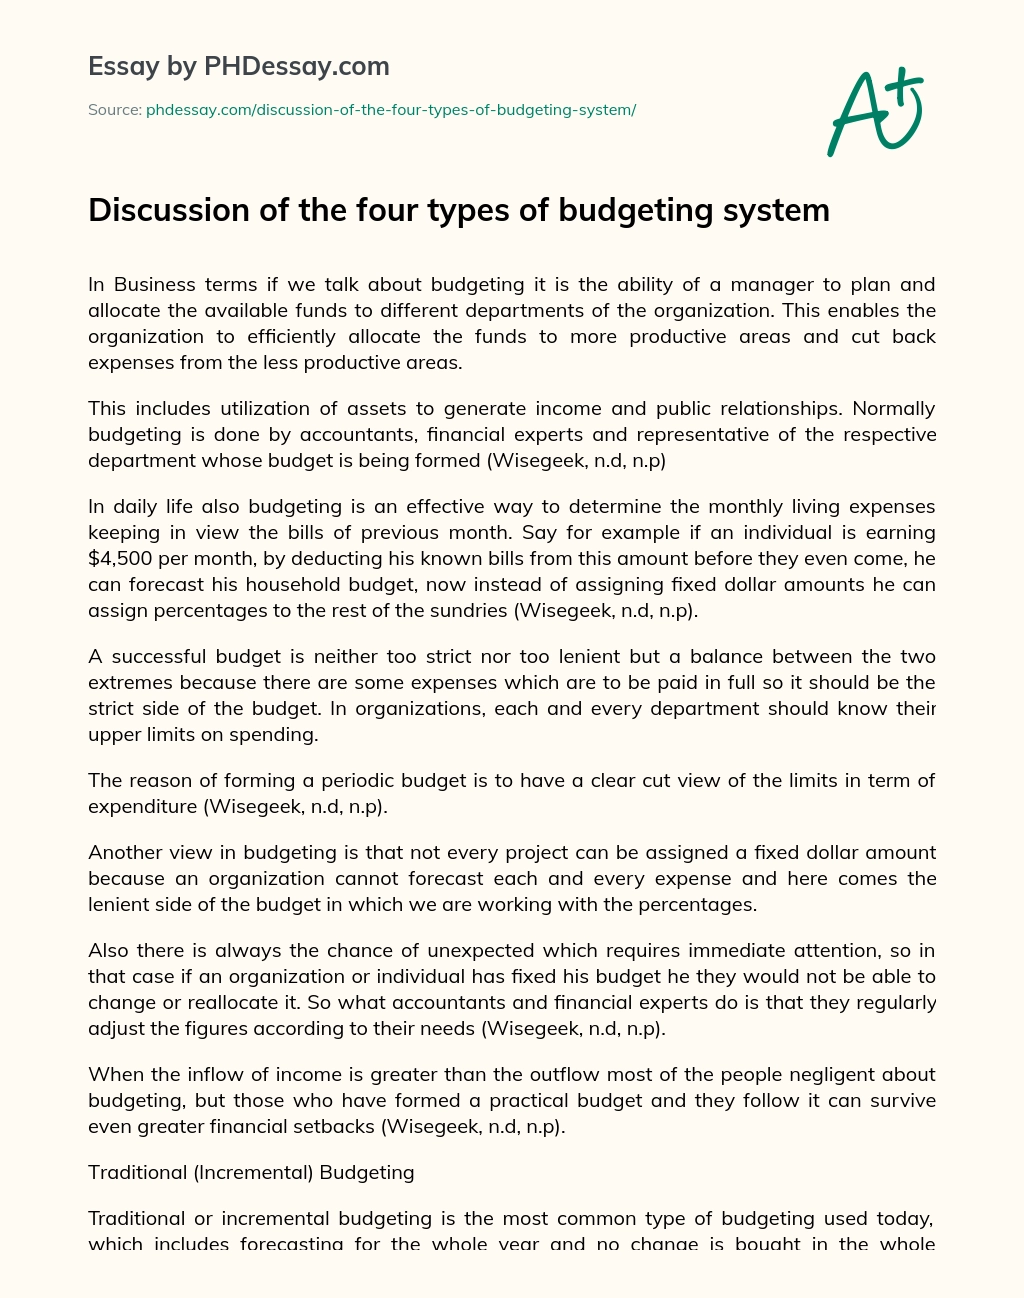 Discussion of the four types of budgeting system essay